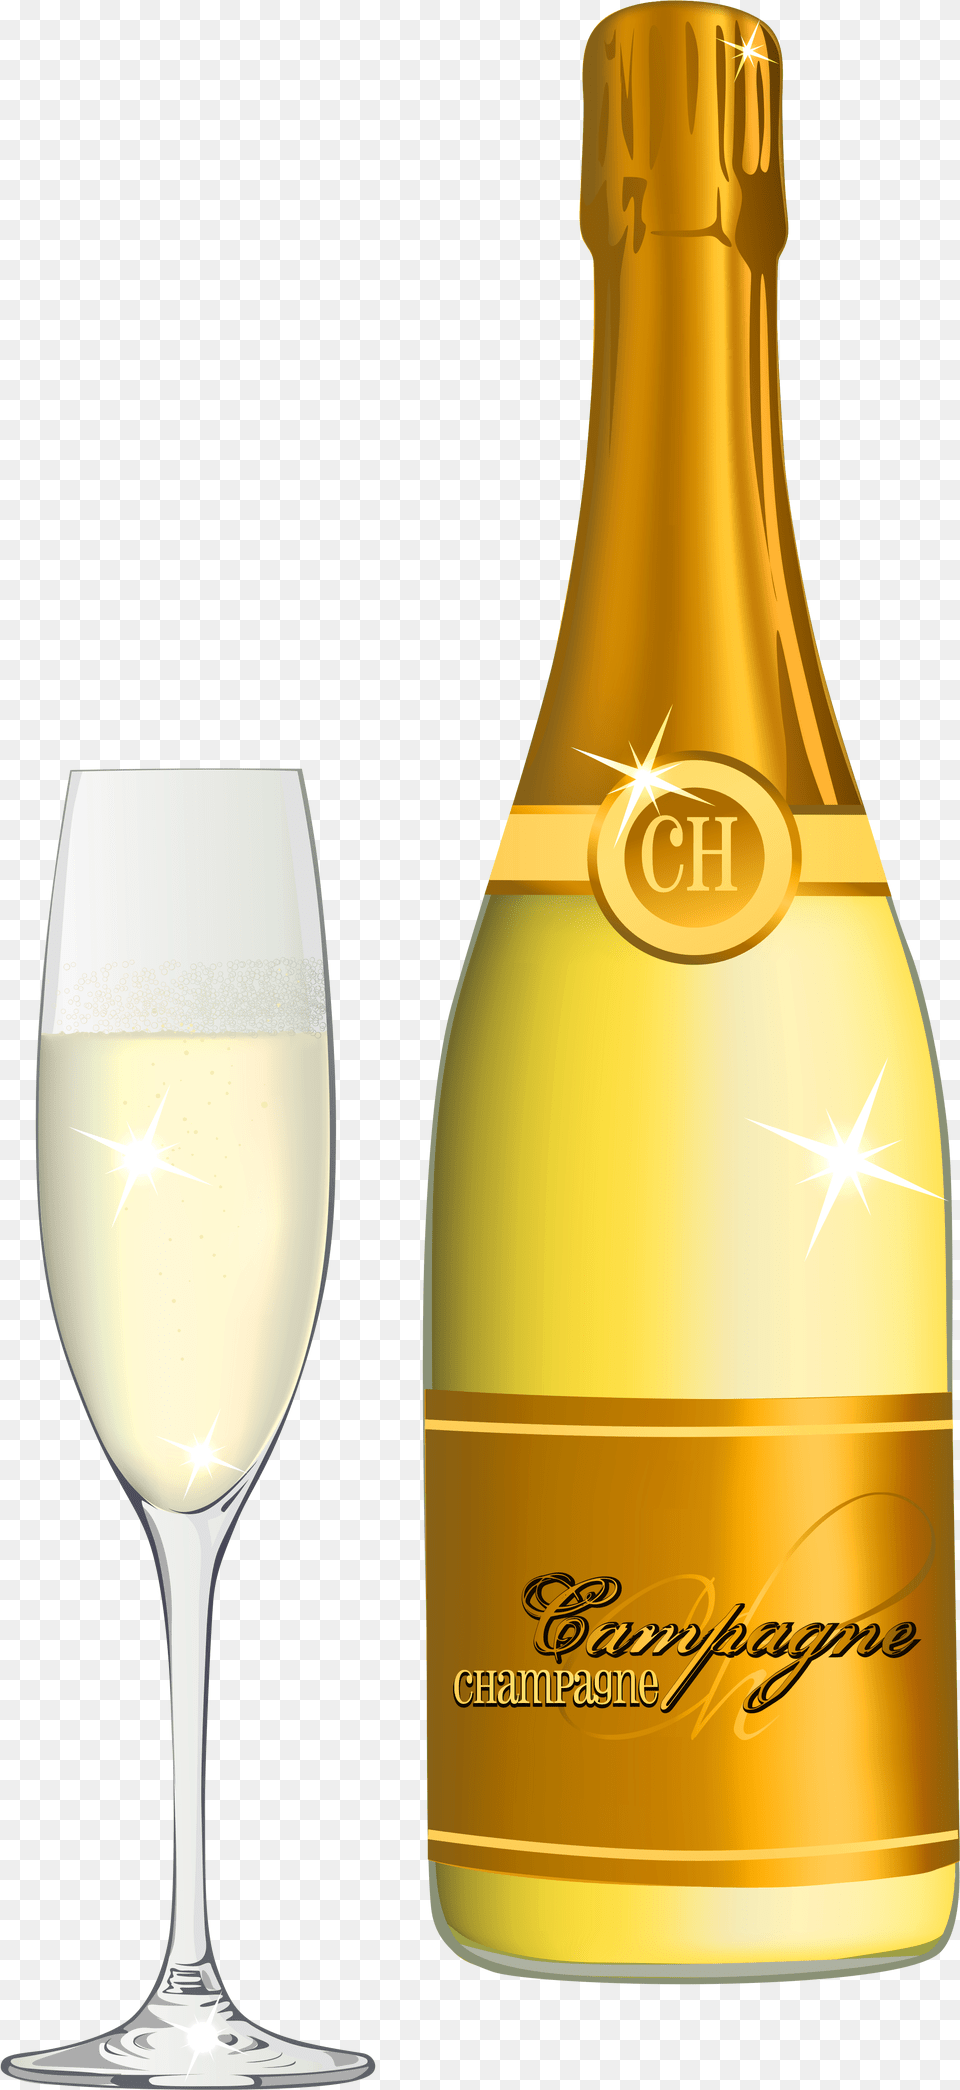 Glass Vector Champagne Bottle Glass Clipart, Alcohol, Wine, Liquor, Beverage Png Image